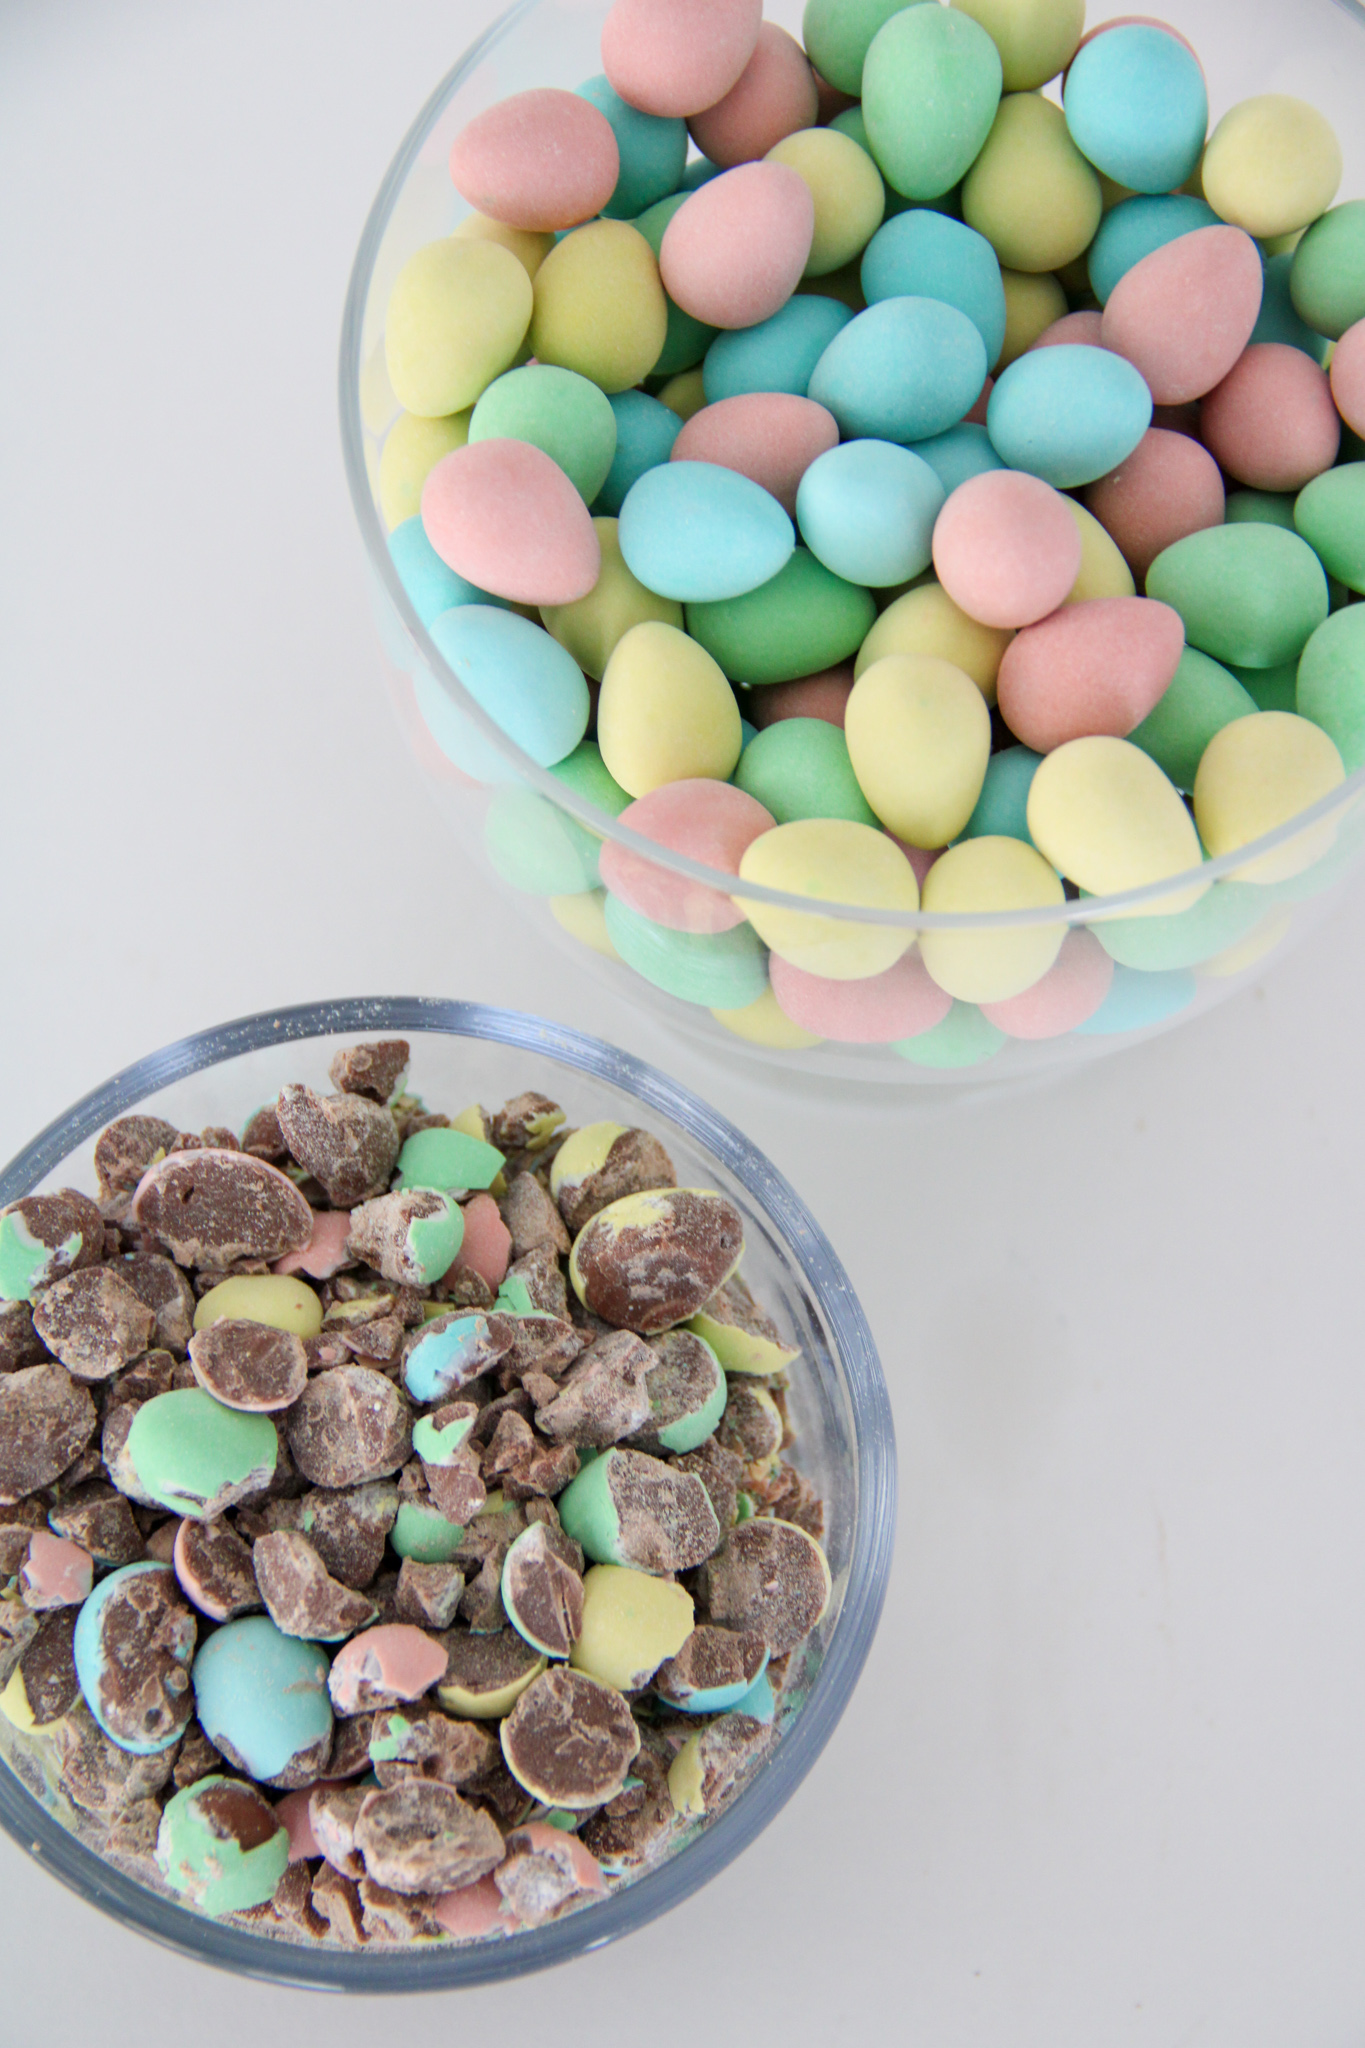 Two bowls of Cadbury Mini Eggs. One bowl has whole candies and one bowl holds crushed candies.